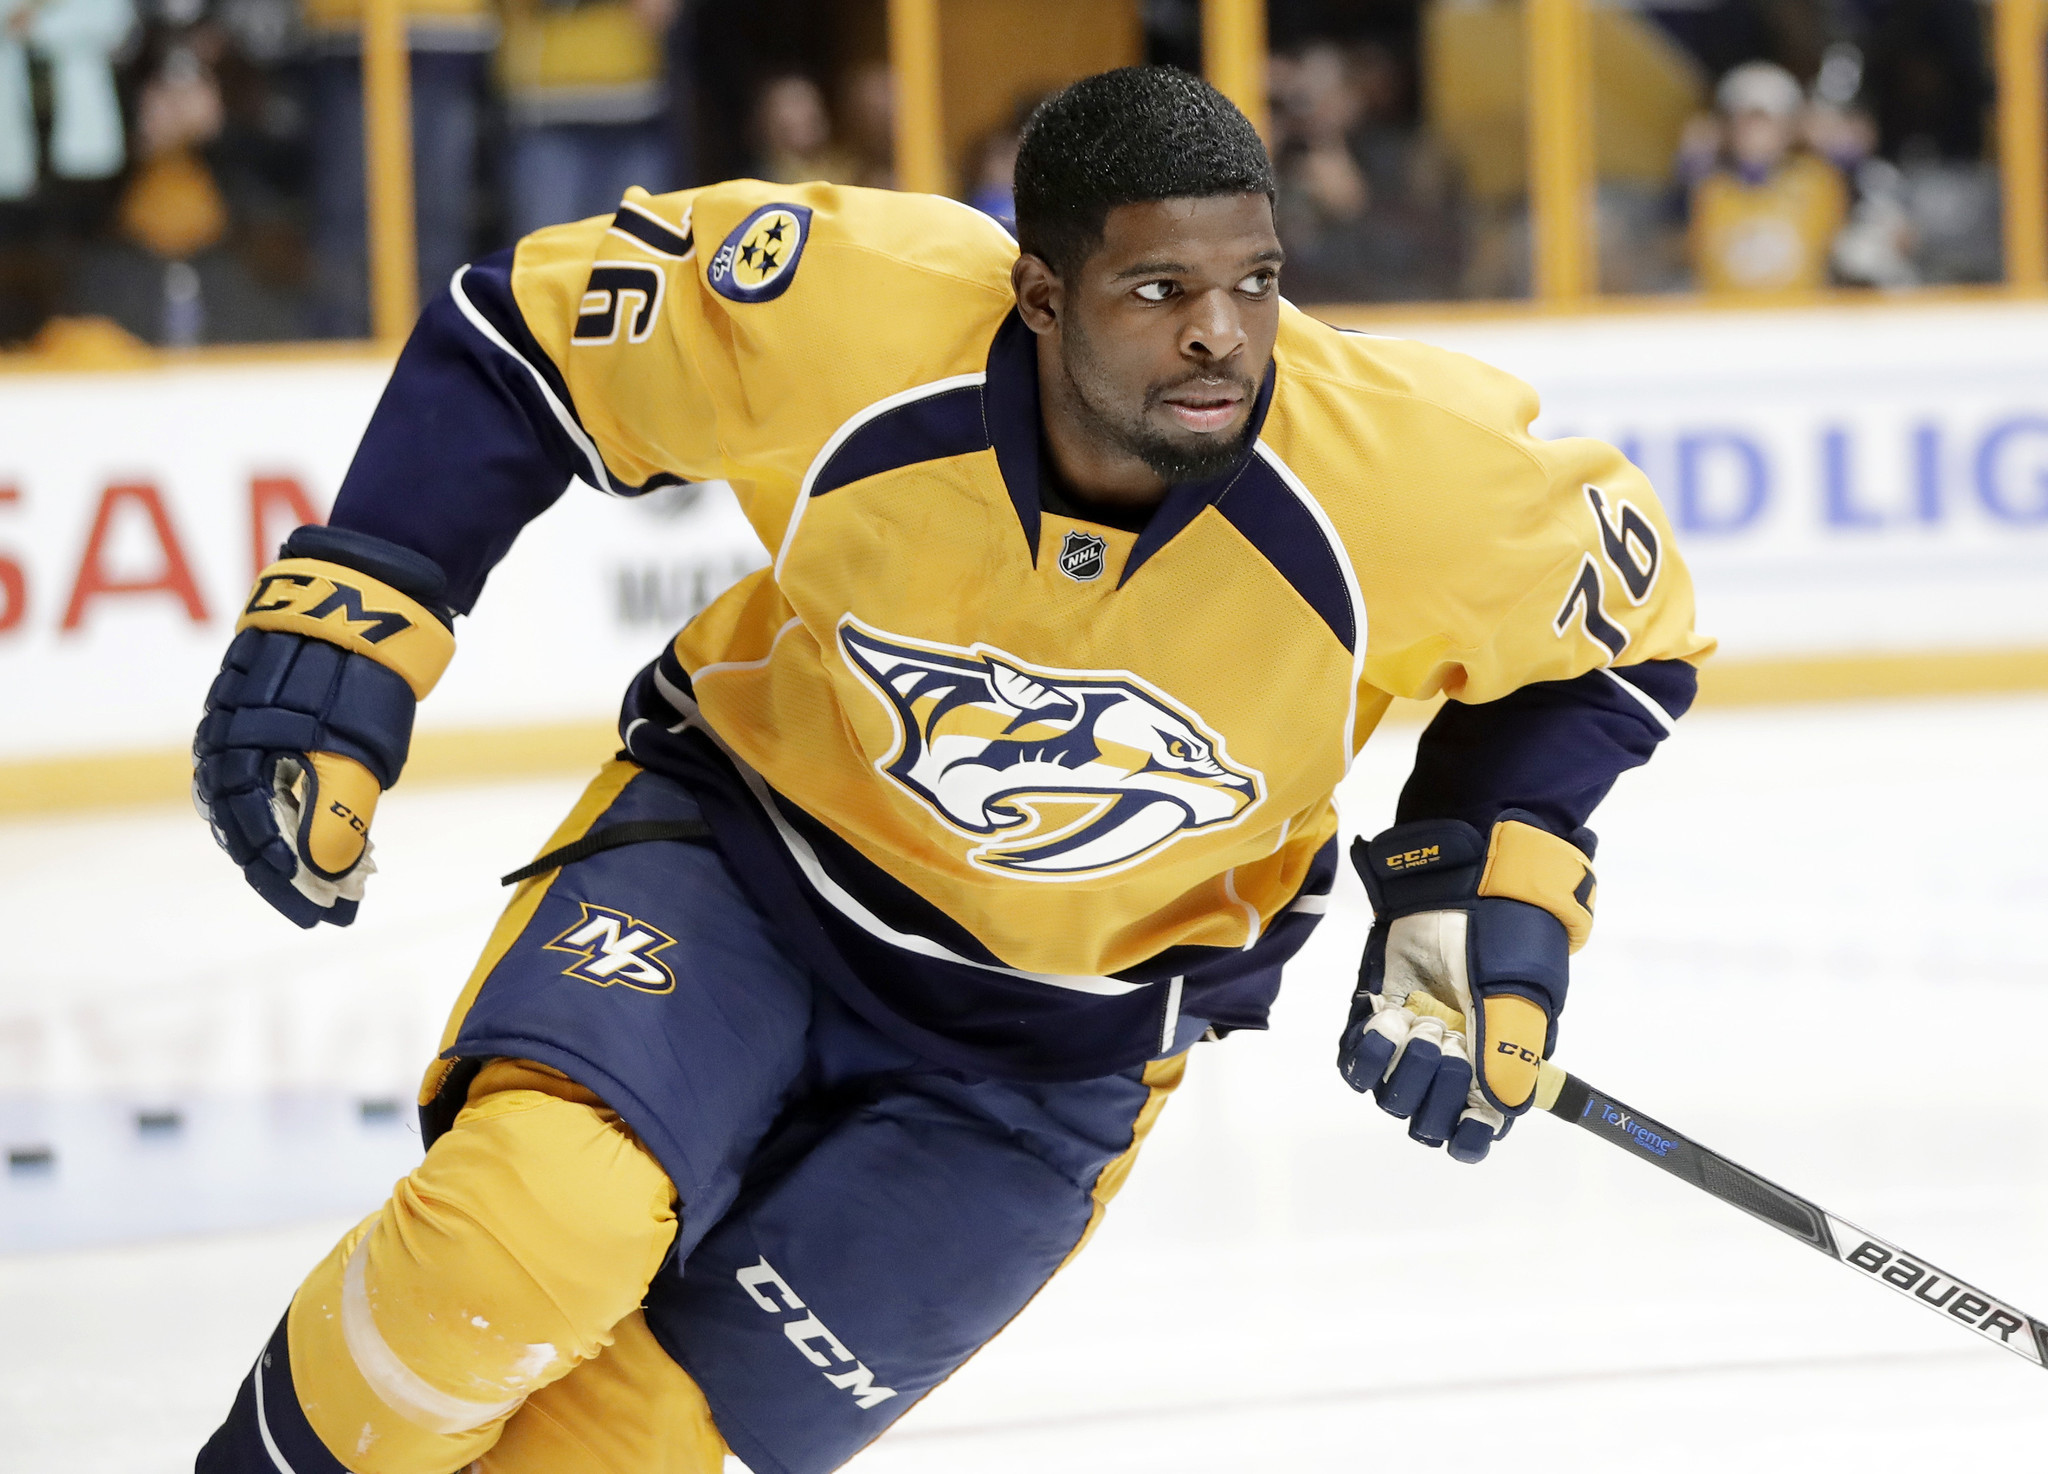 P.K. Subban maintains his dynamic personality and style of play in move